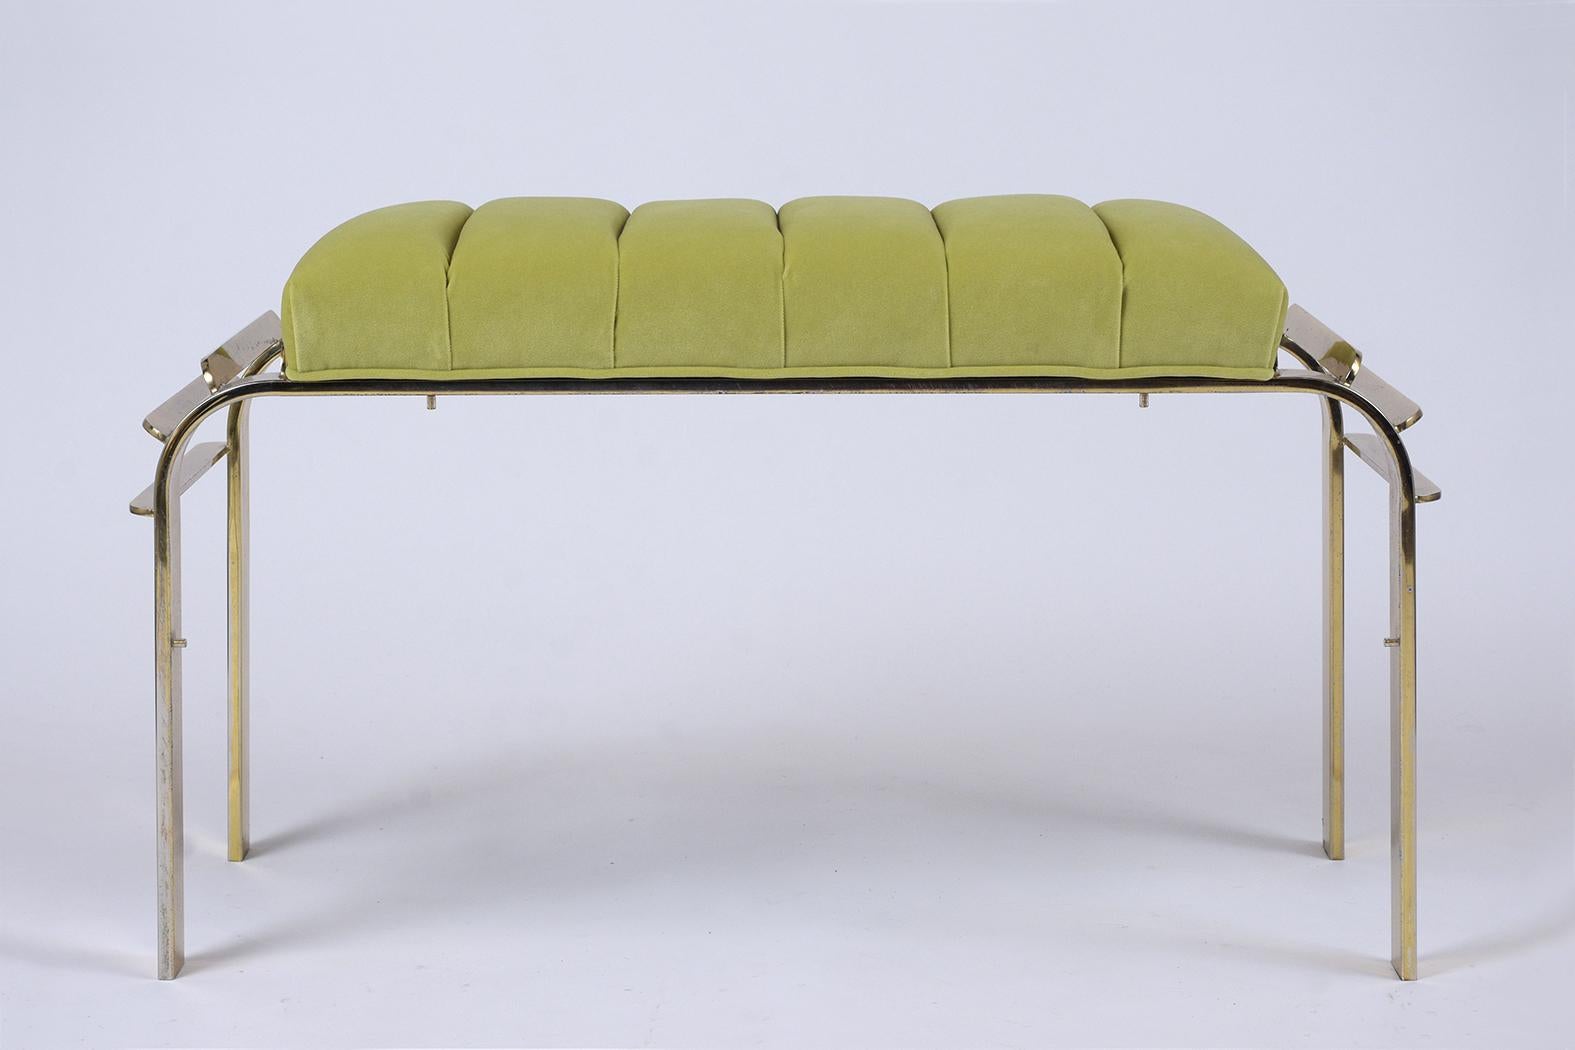 American Mid-Century Modern Tufted Benches